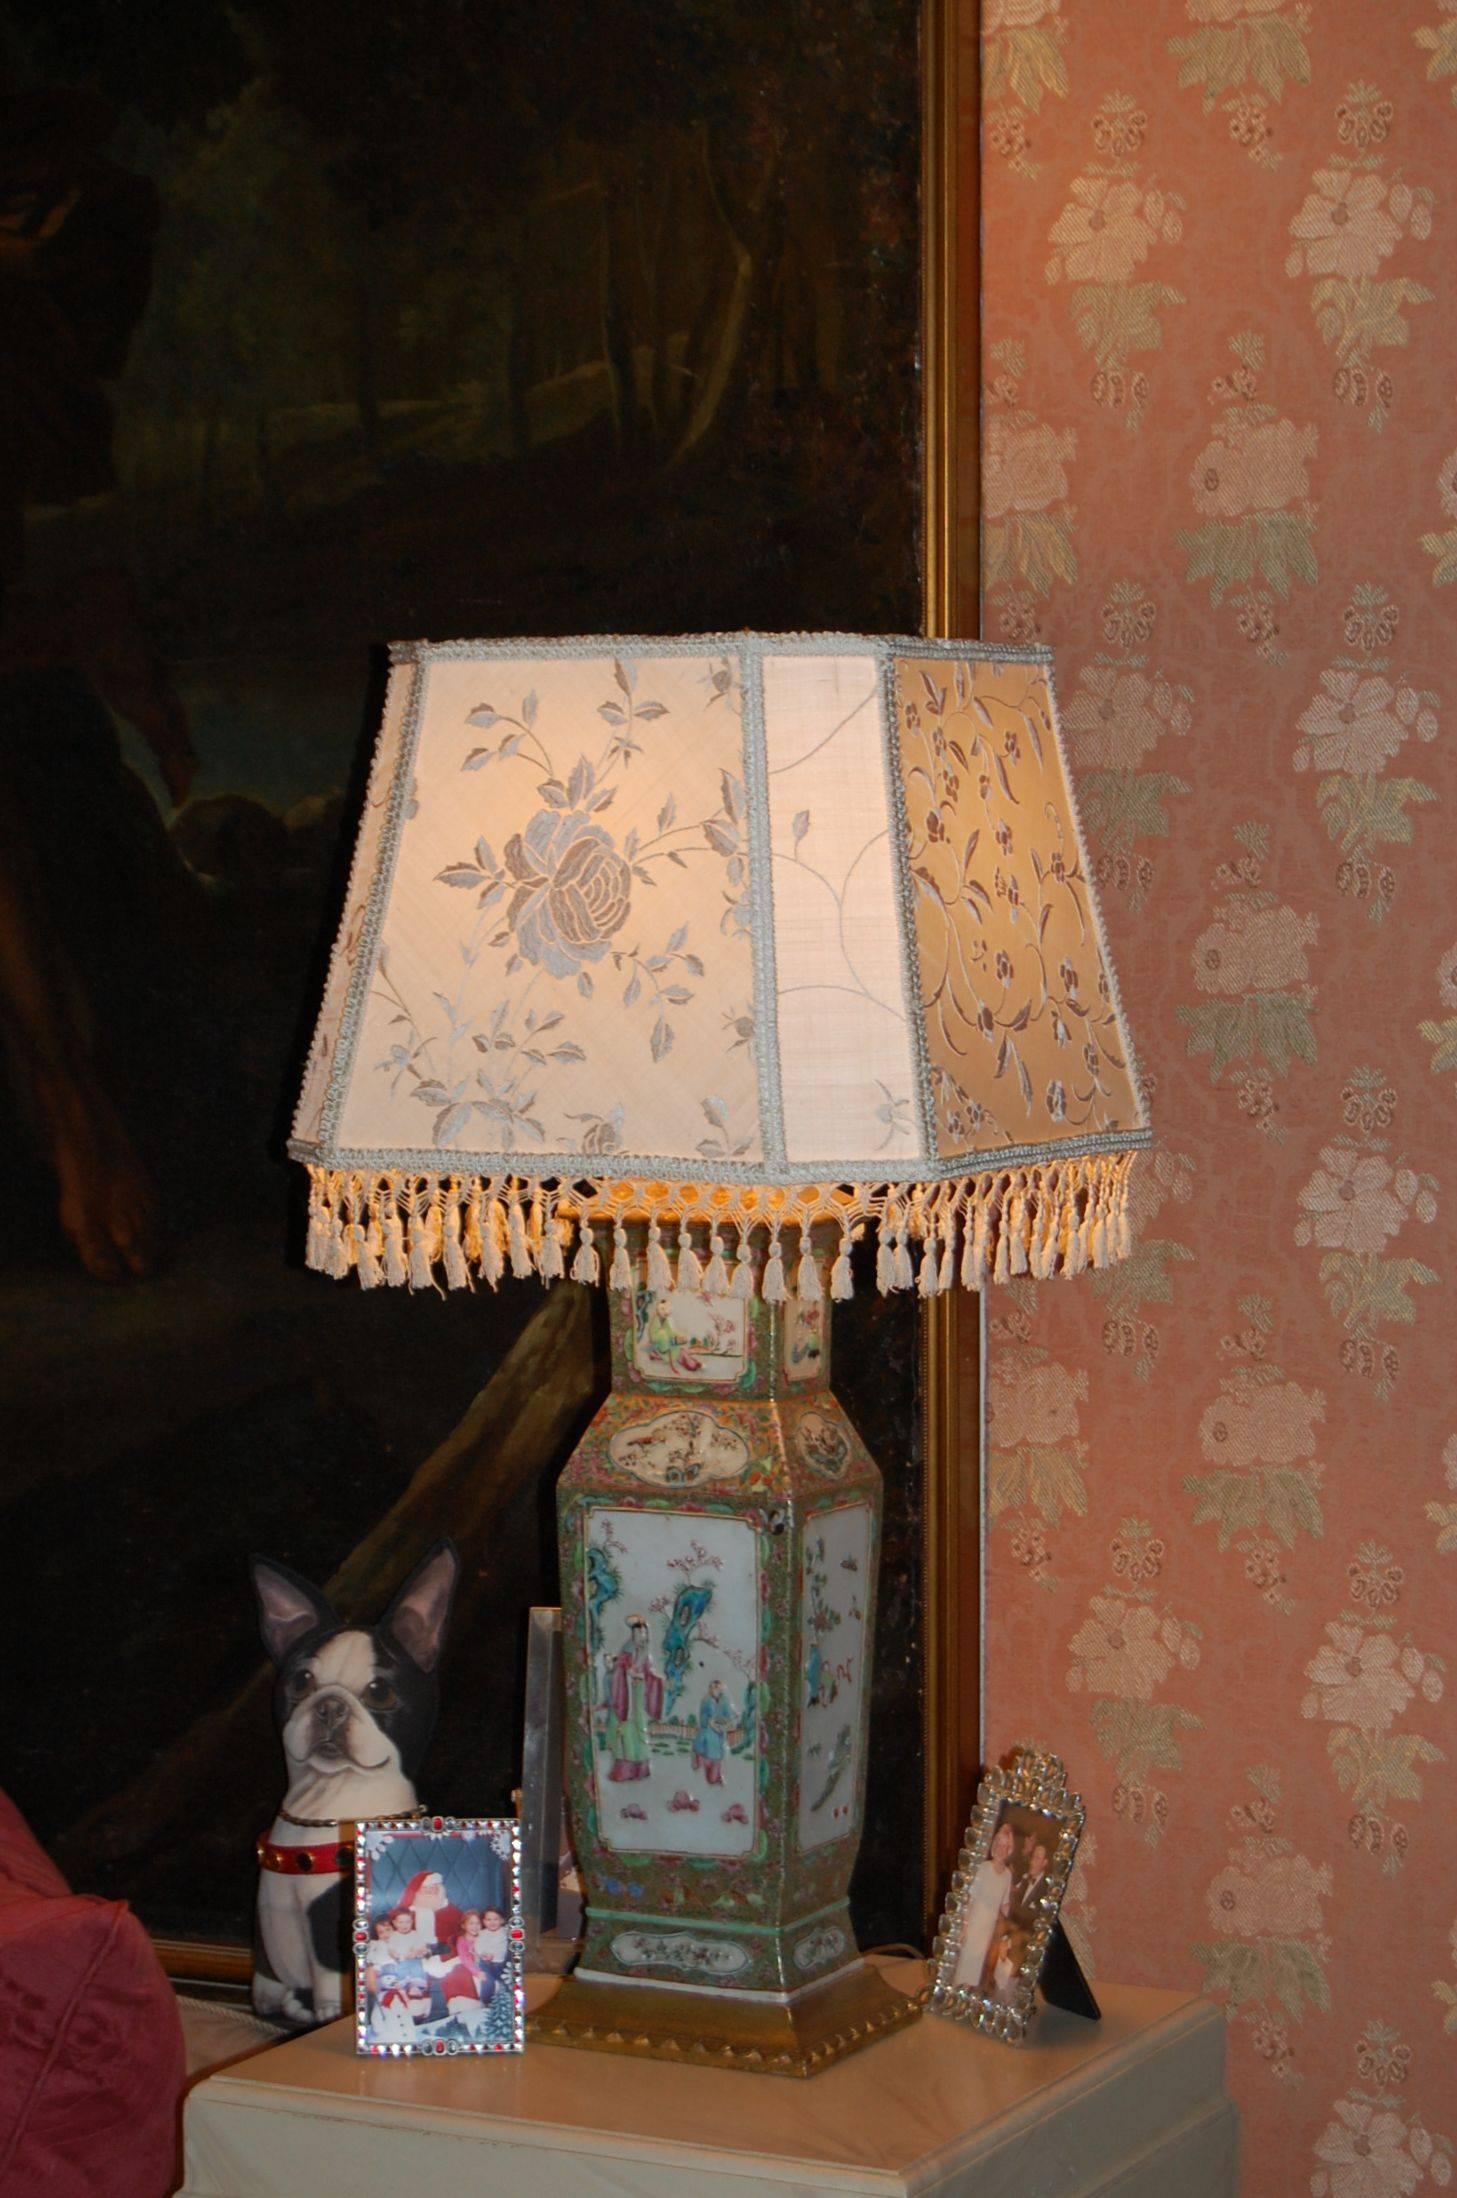 Pair of Chinese style urn lamps with custom-made embroidered silk shades with tassel trim. Gilt finished wooden bases and caps wired with three way sockets. Measures: Top of porcelain to the table is 19", shade rest is 32.5". Possibly